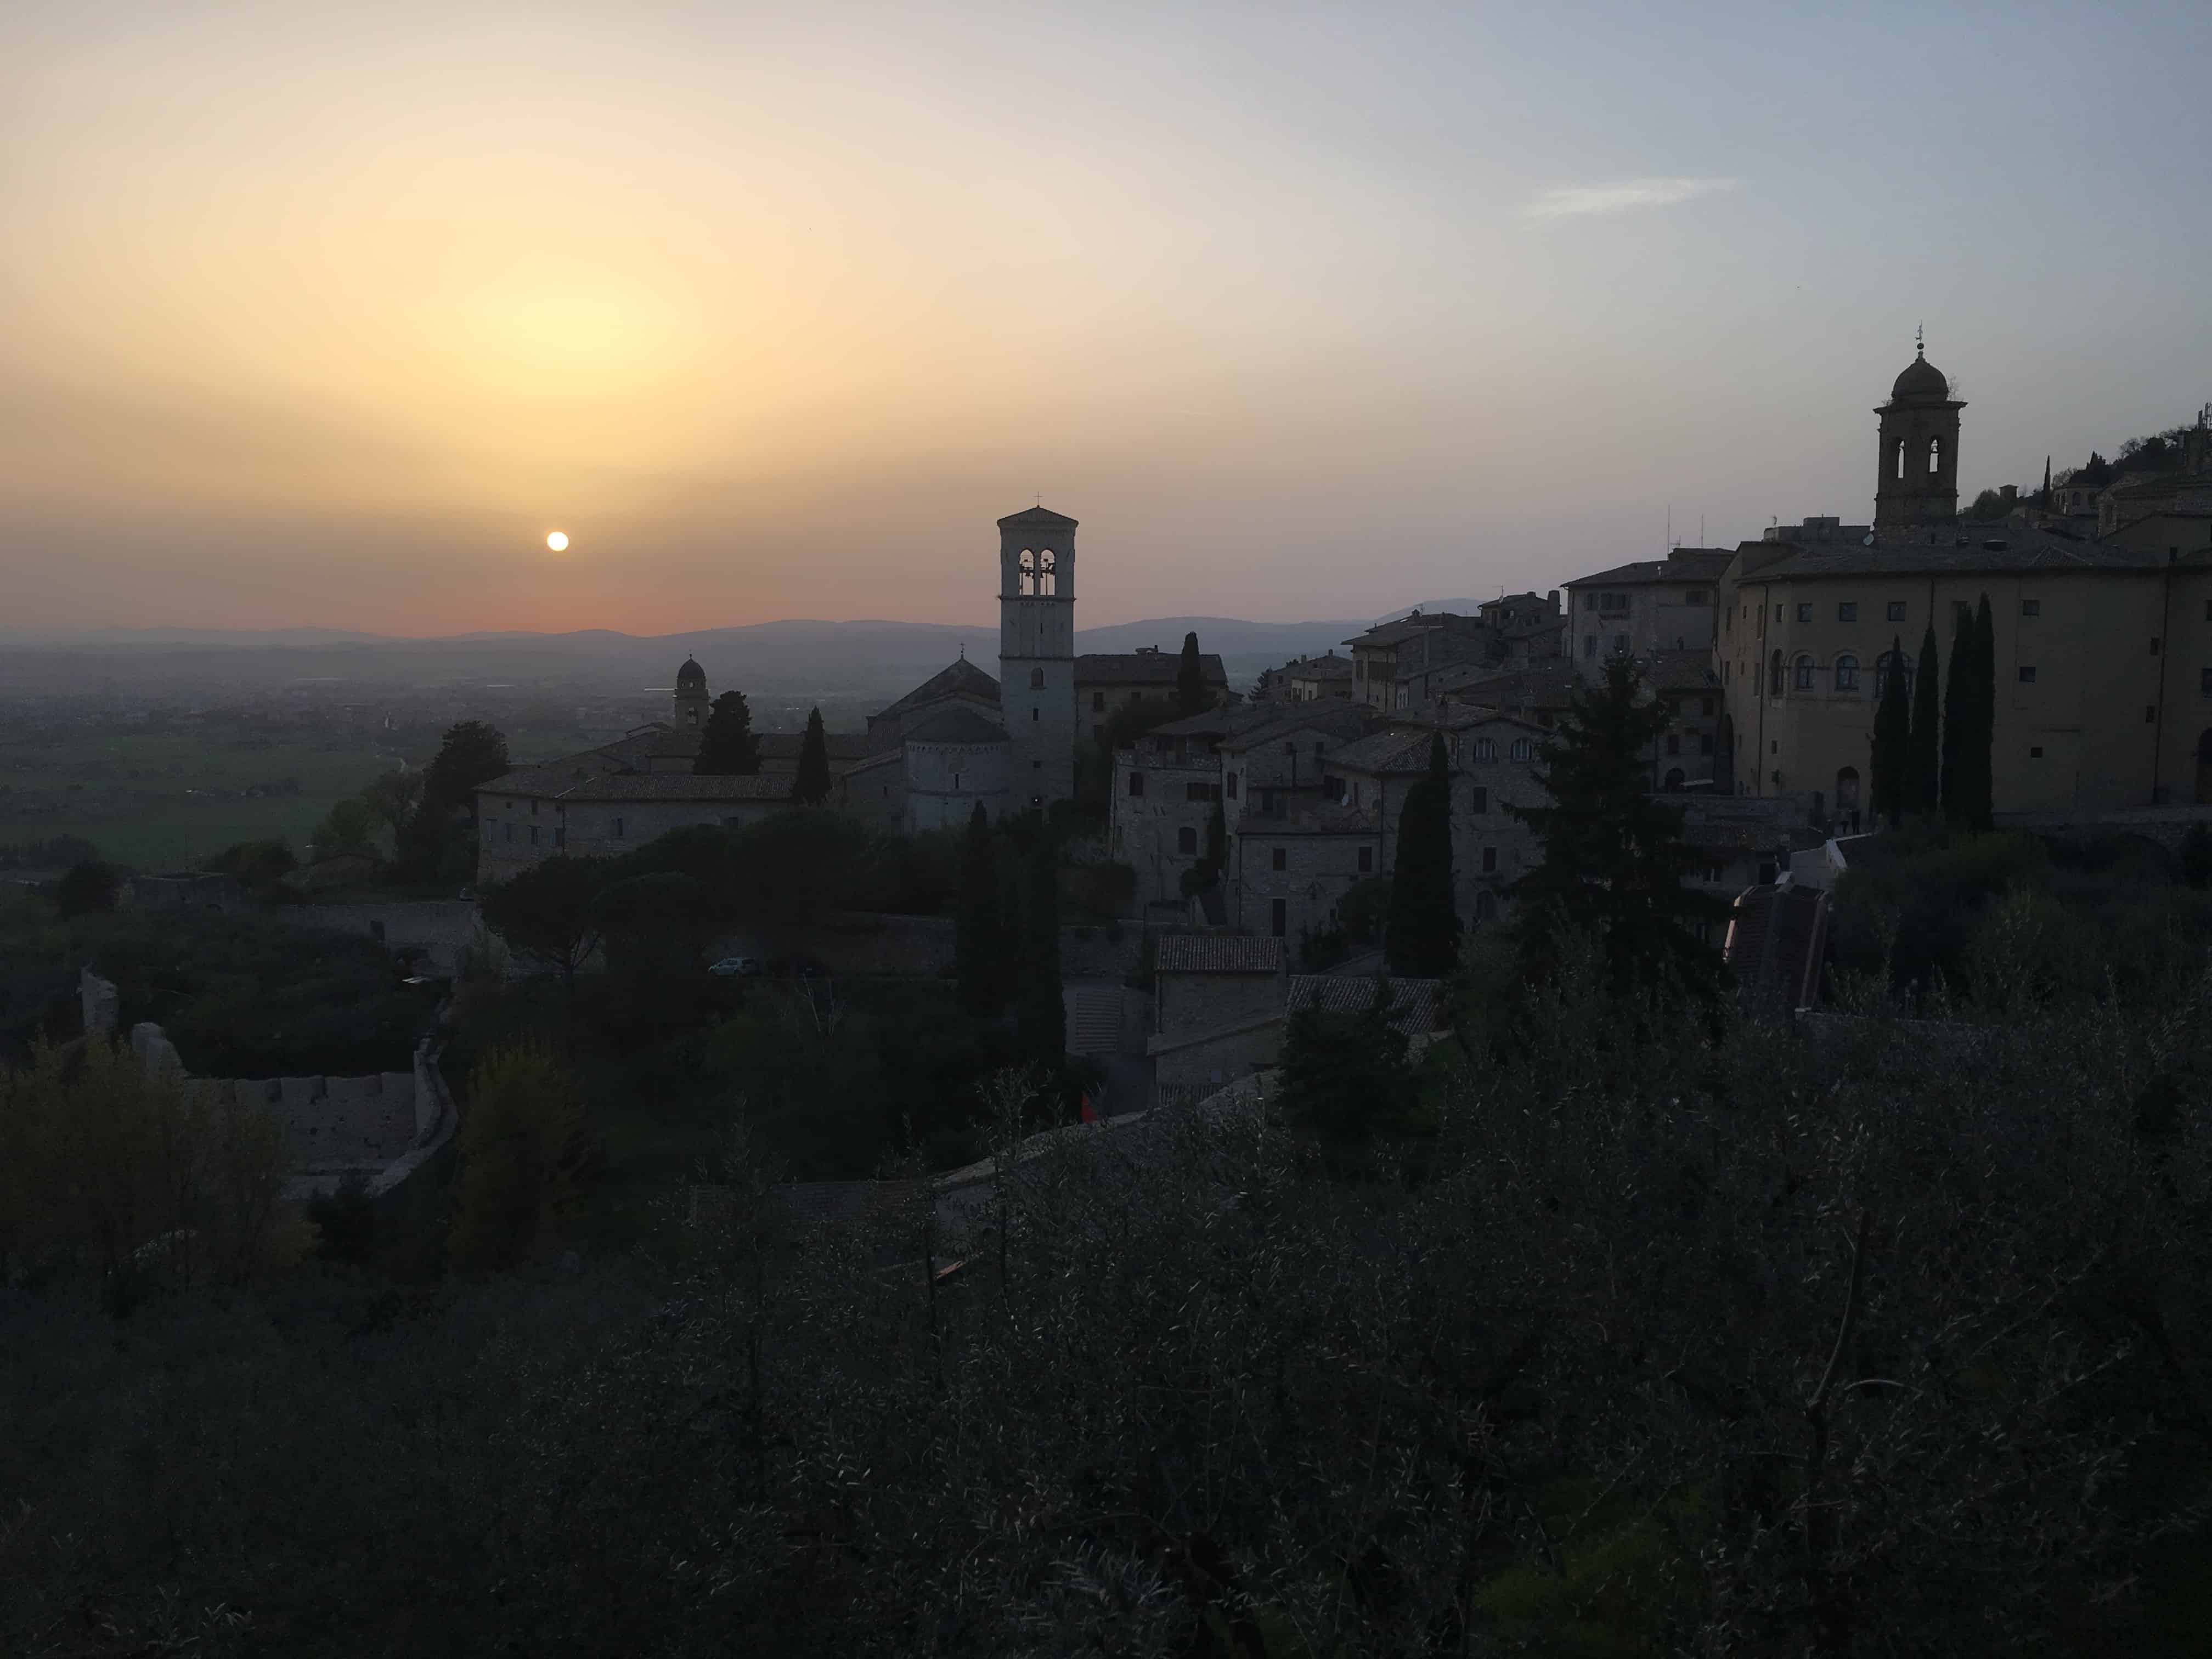 Sunset over Assisi from the Piazza Santa Chiara.